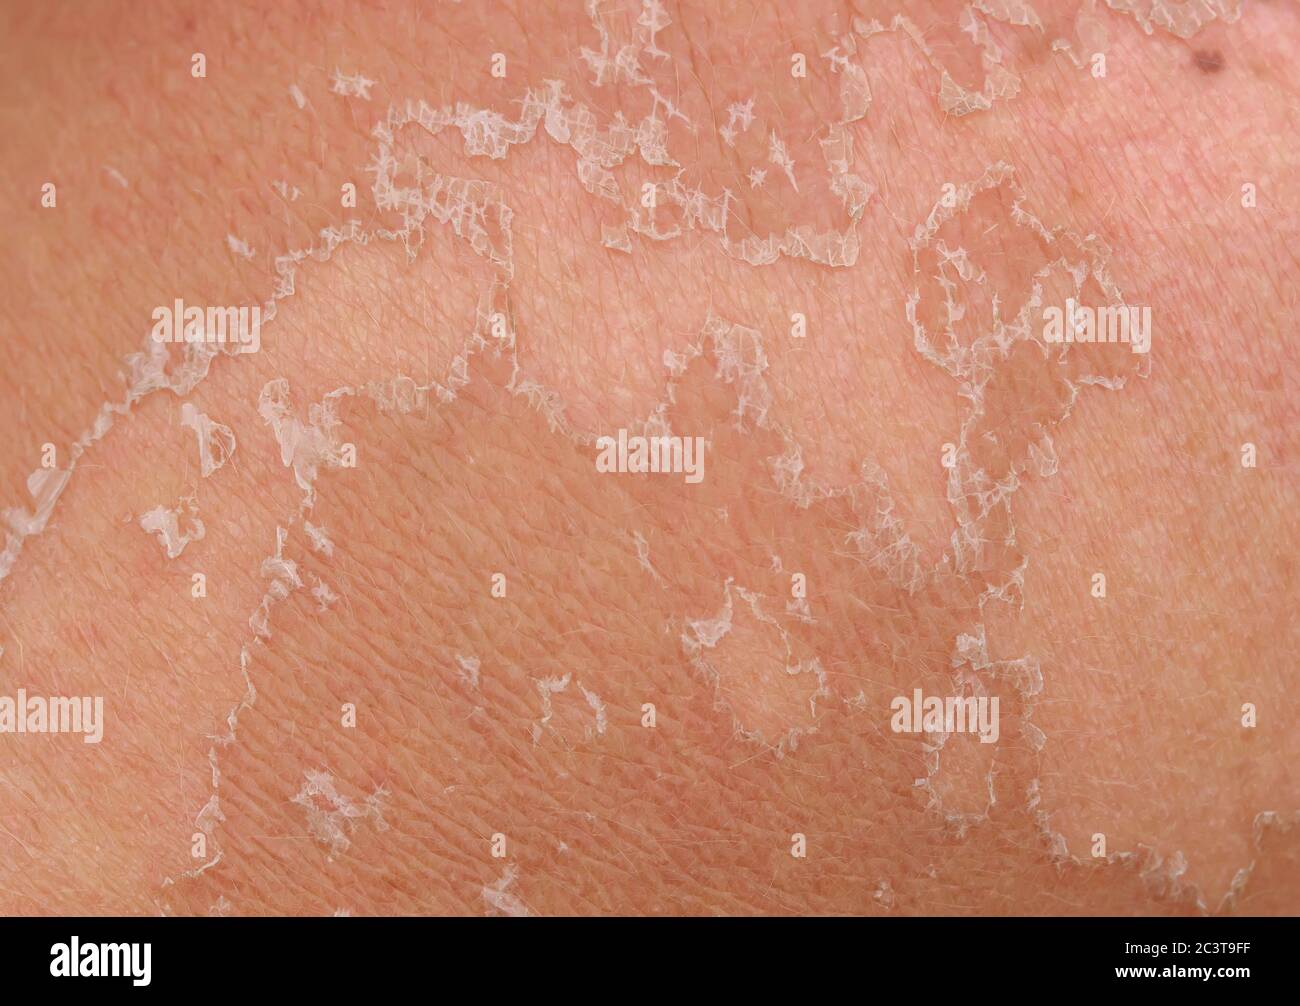 skin texture with scales of dead cells and redness after sunburn come off the body Stock Photo